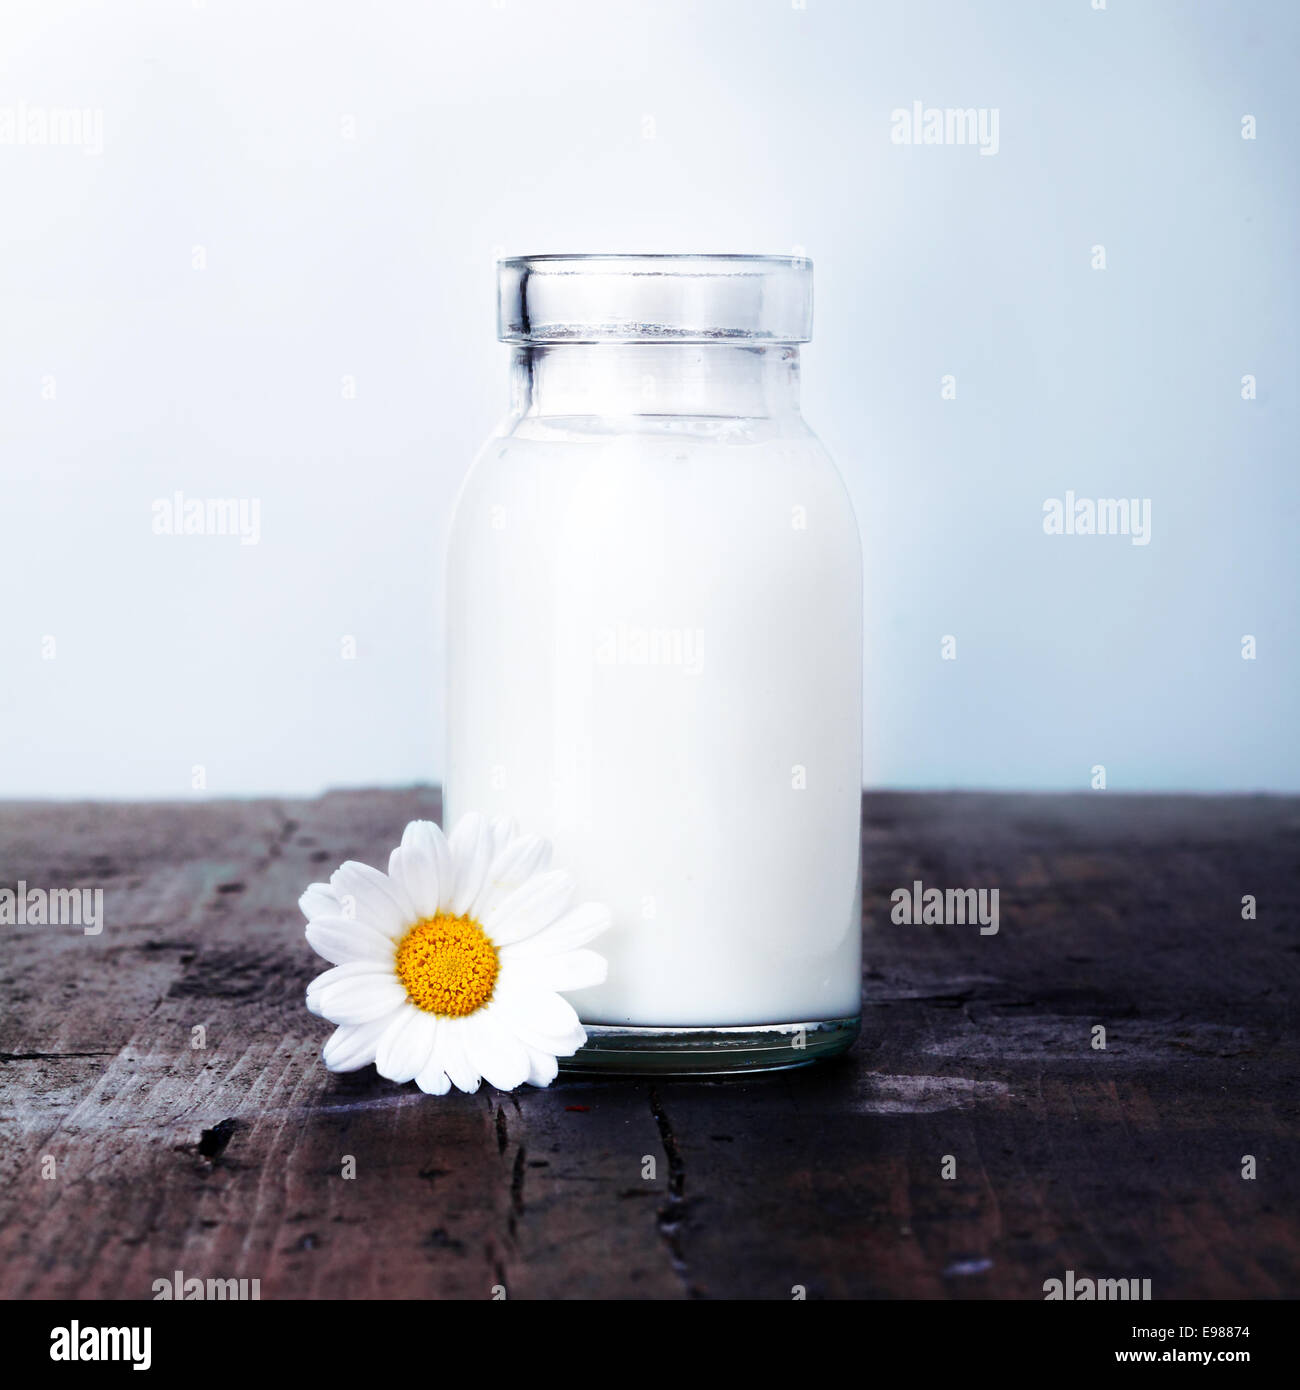 https://c8.alamy.com/comp/E98874/carafe-of-milk-and-a-daisy-set-on-an-outdoor-table-ready-for-a-refreshing-E98874.jpg